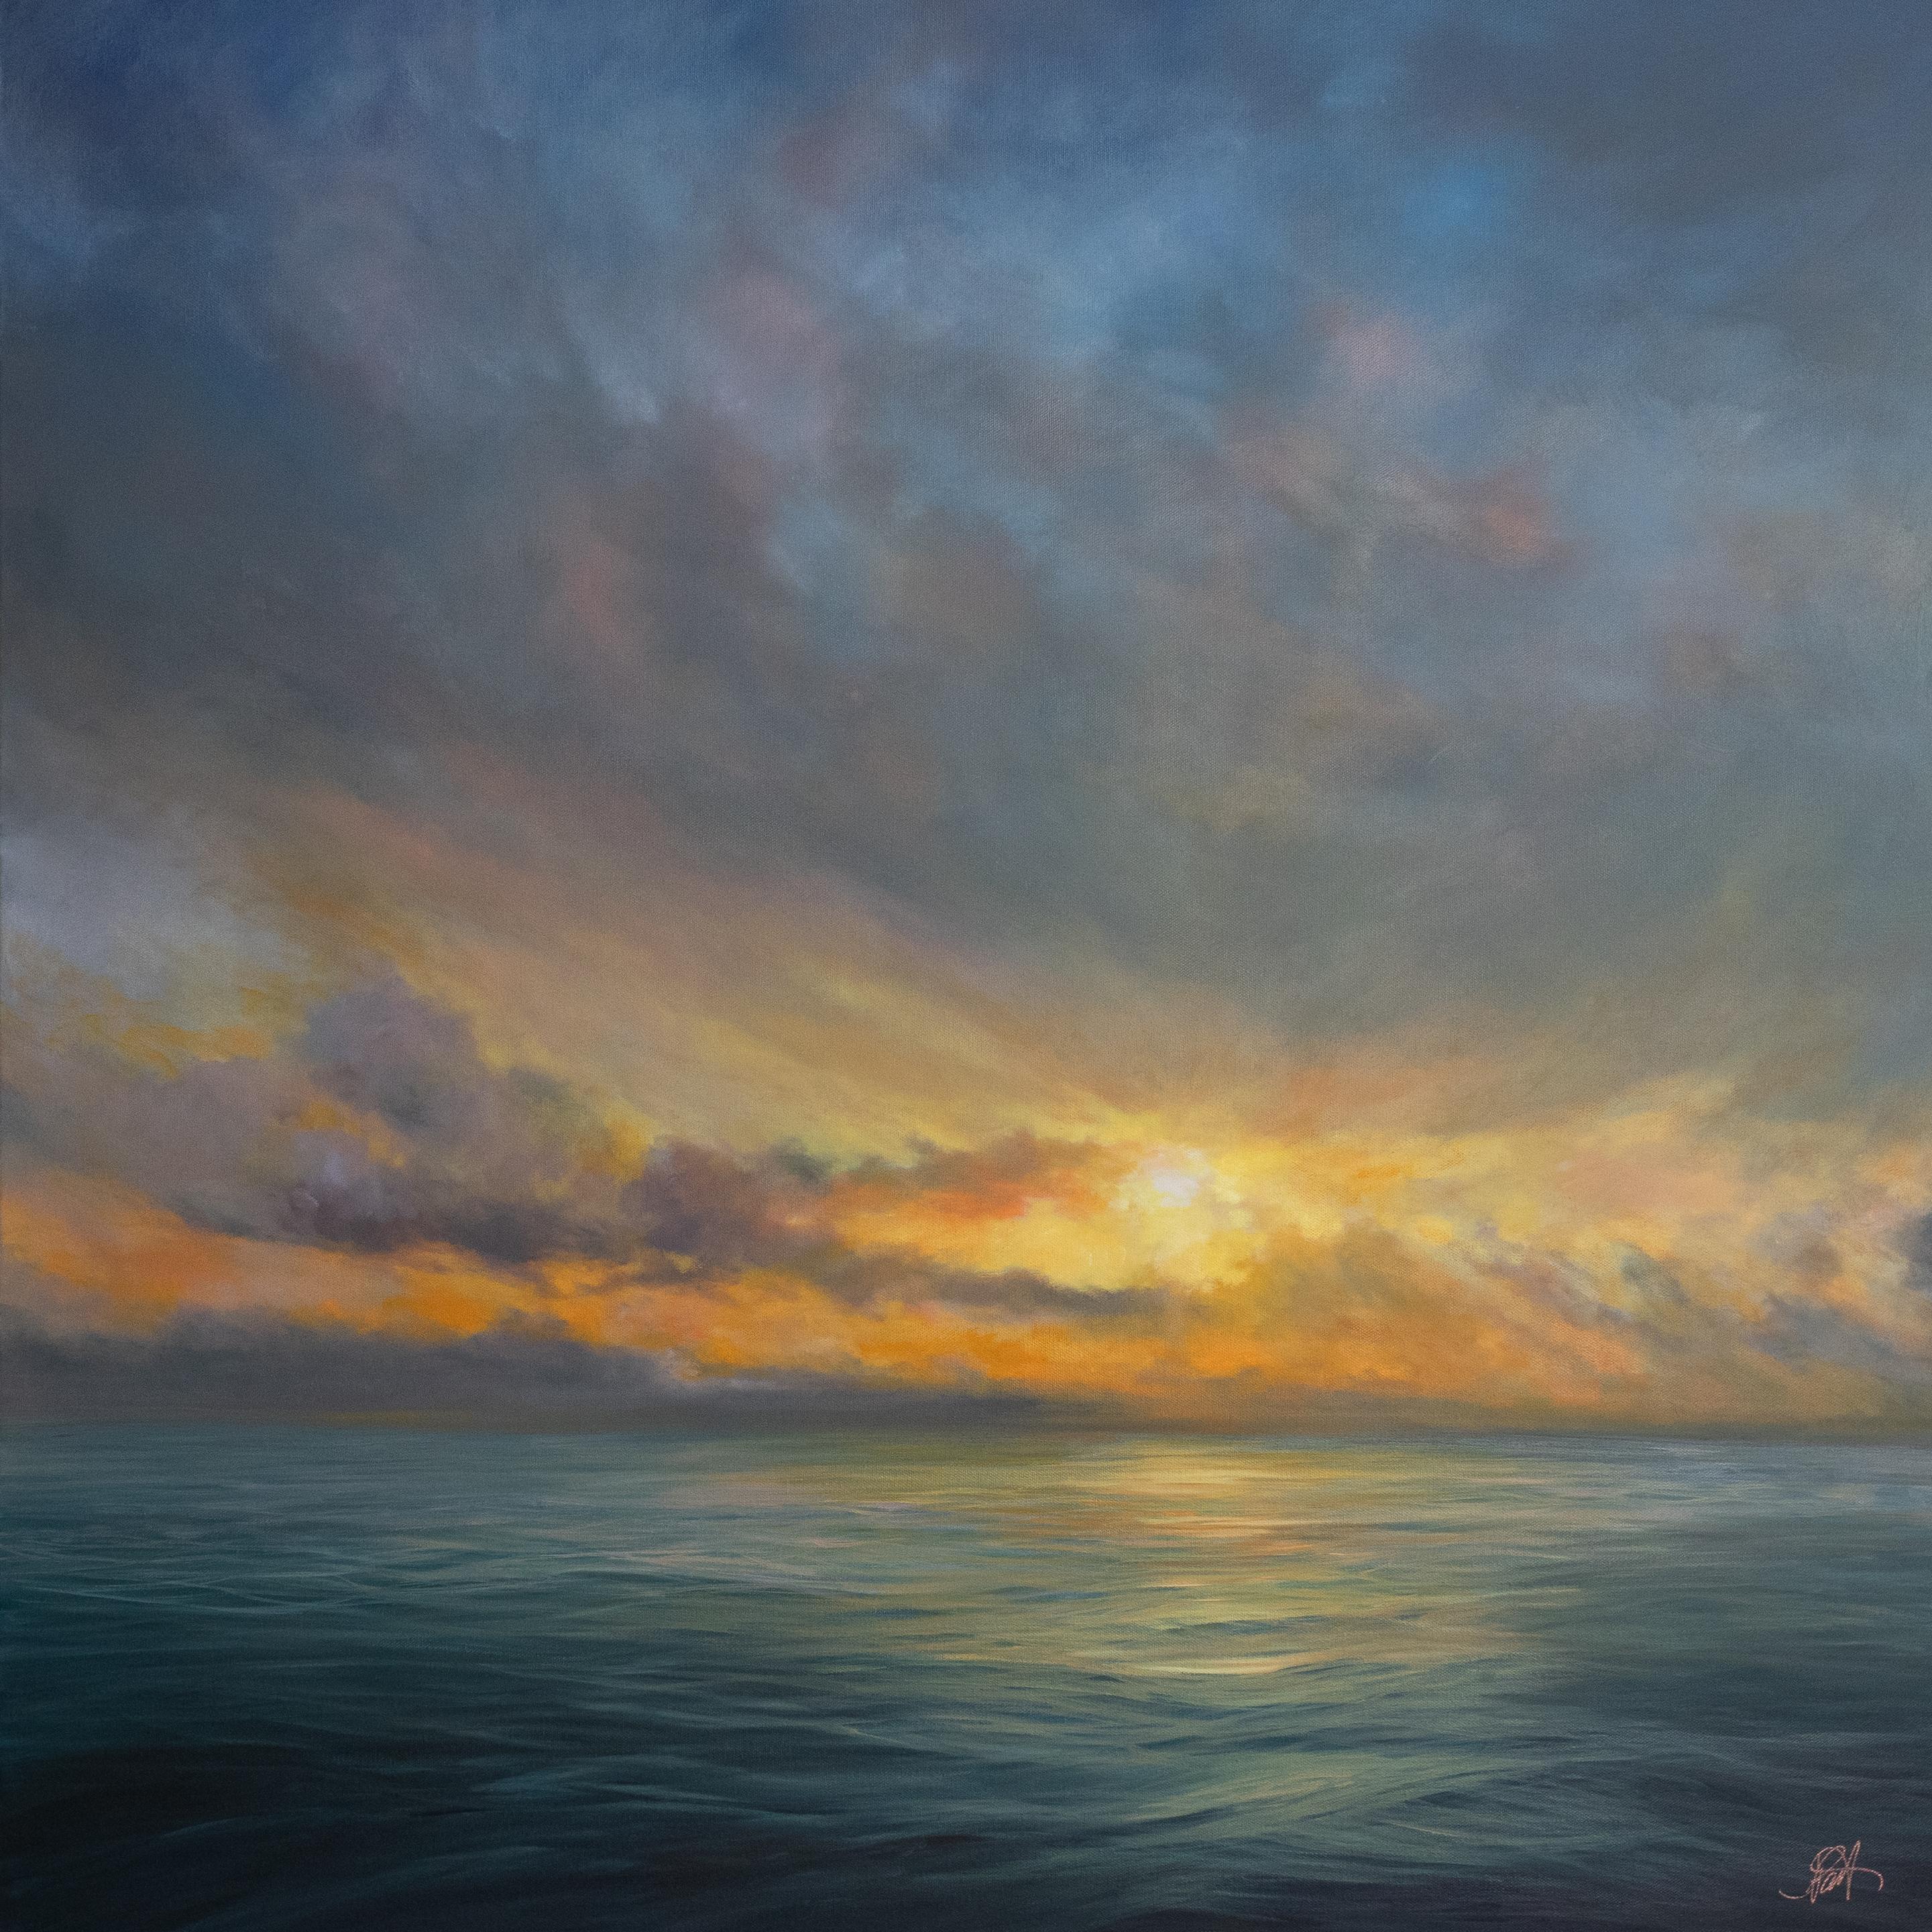 What is a seascape painting?